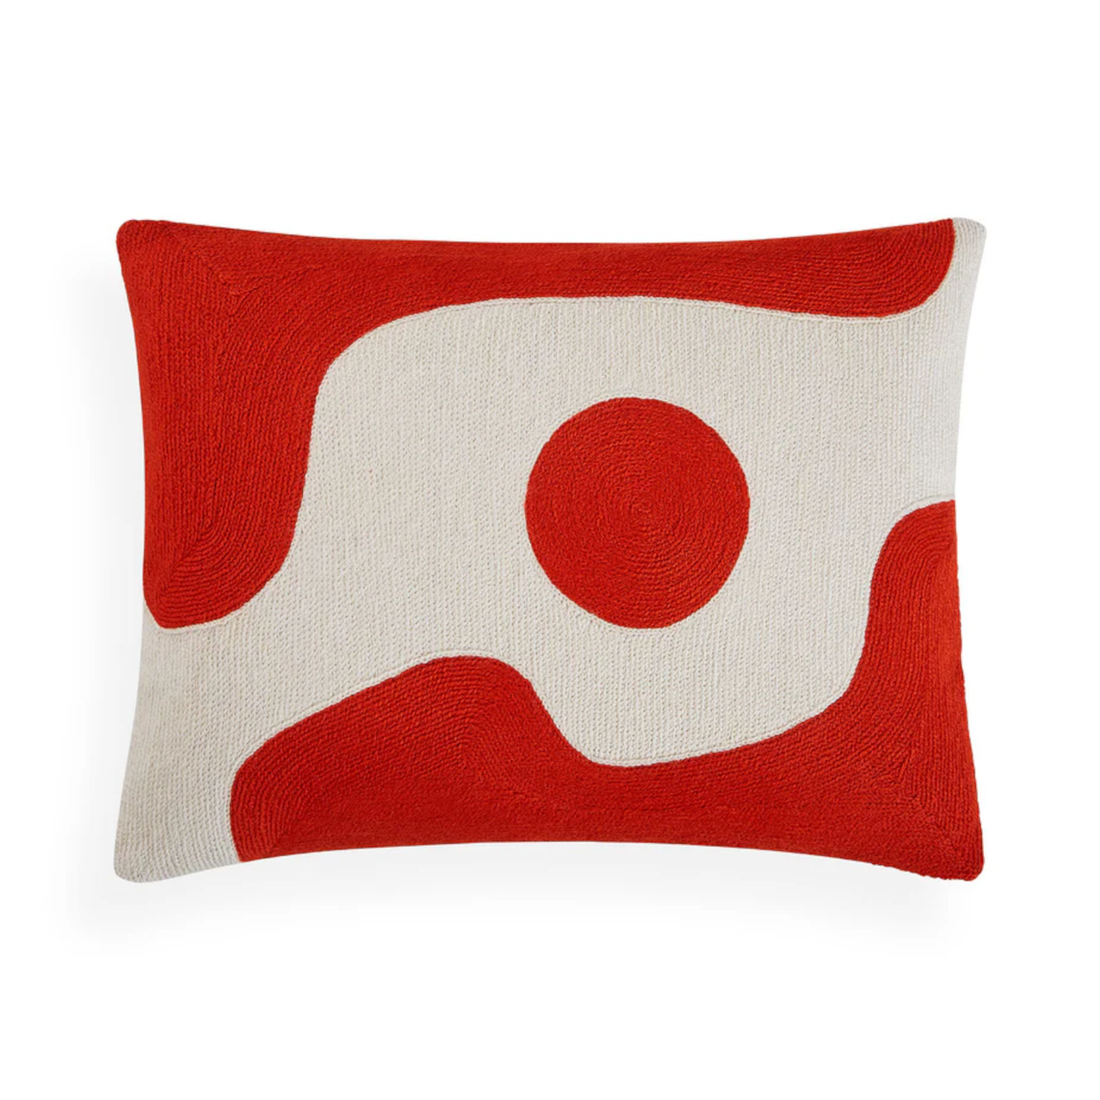 Cushion OJAI CURVES, red-white, hand-embroidered